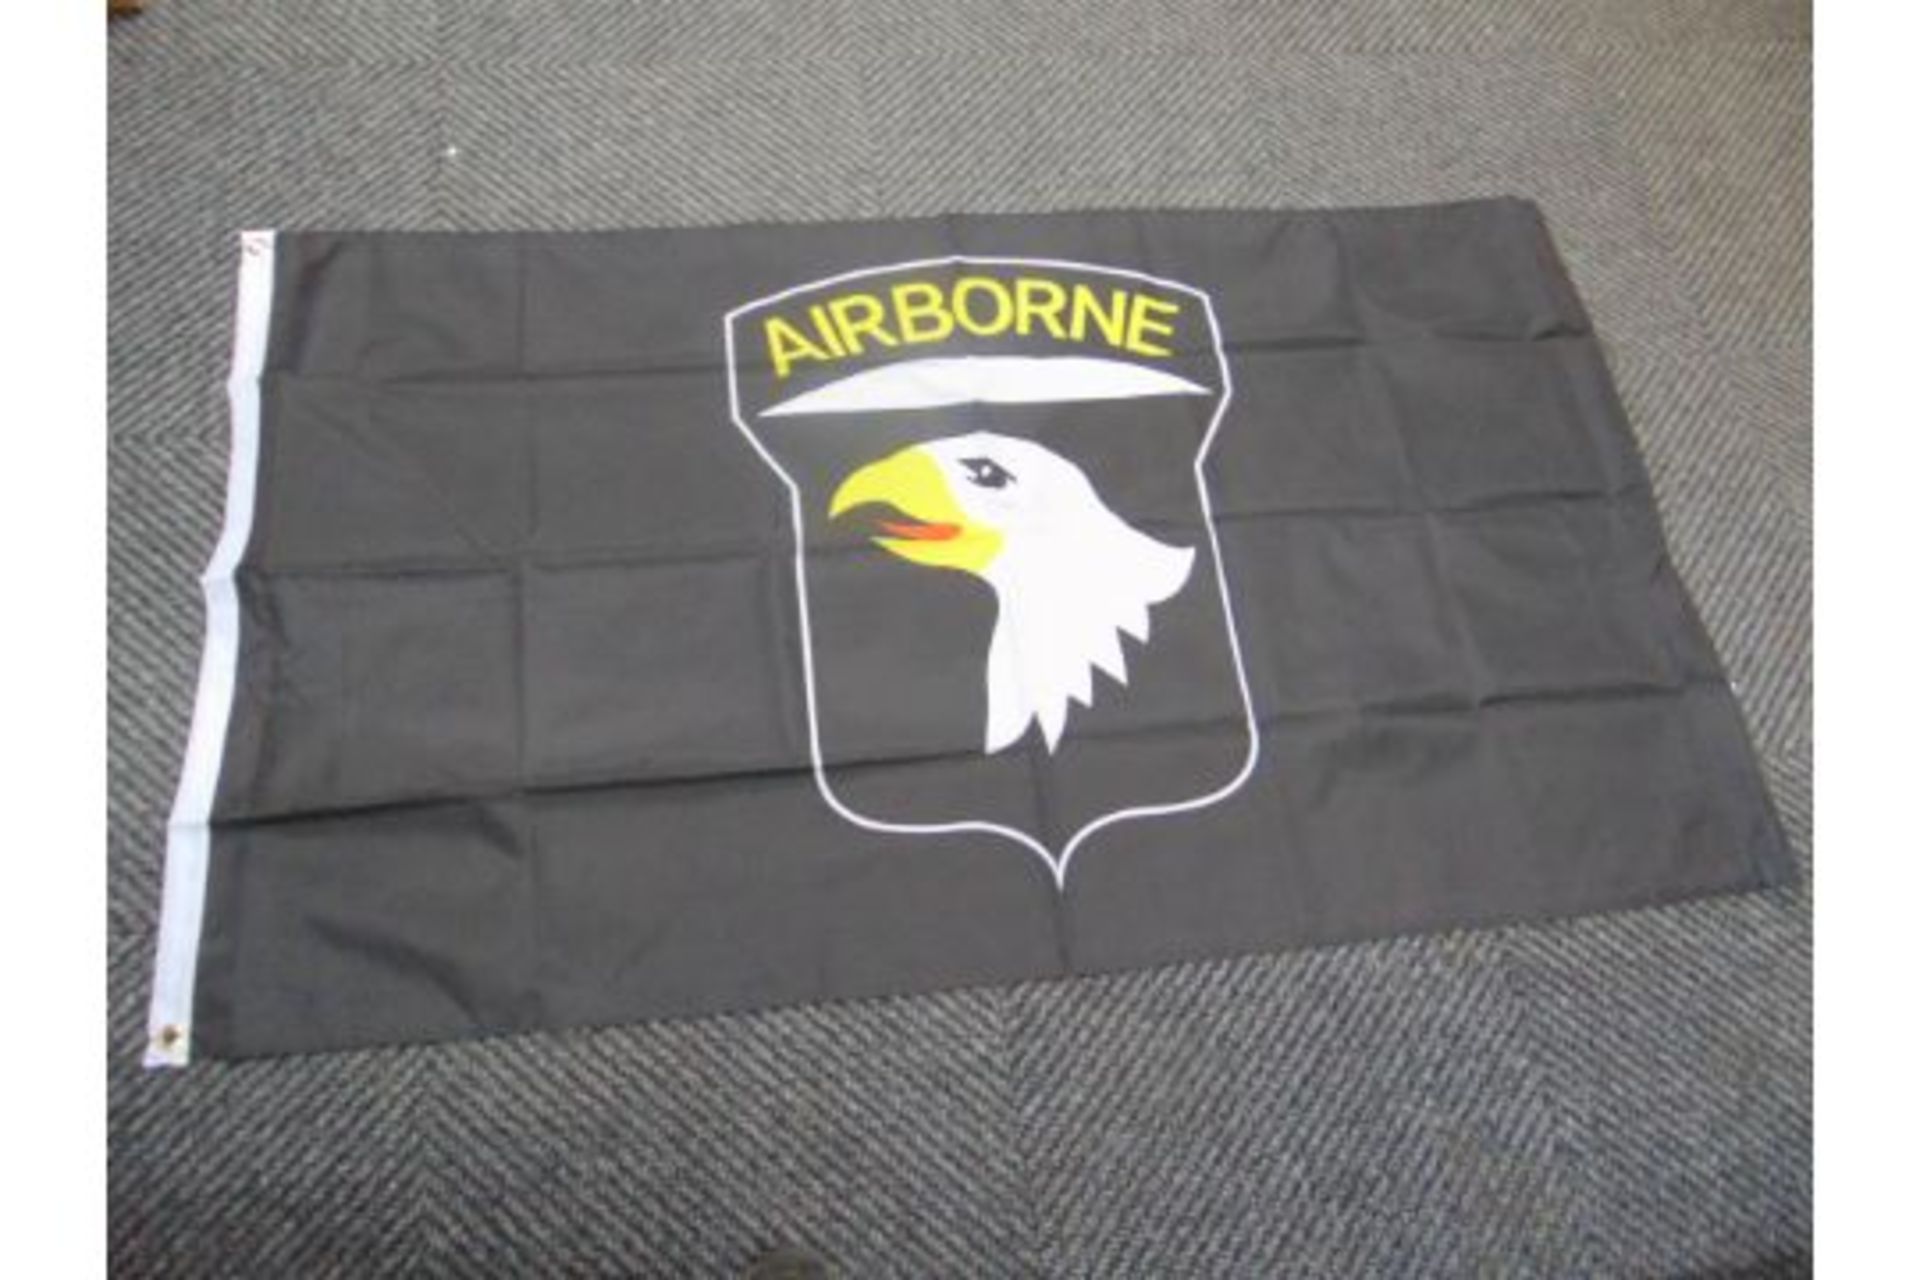 101st Airborne (Black) Flag - 5ft x 3ft with metal eyelets - Image 3 of 4